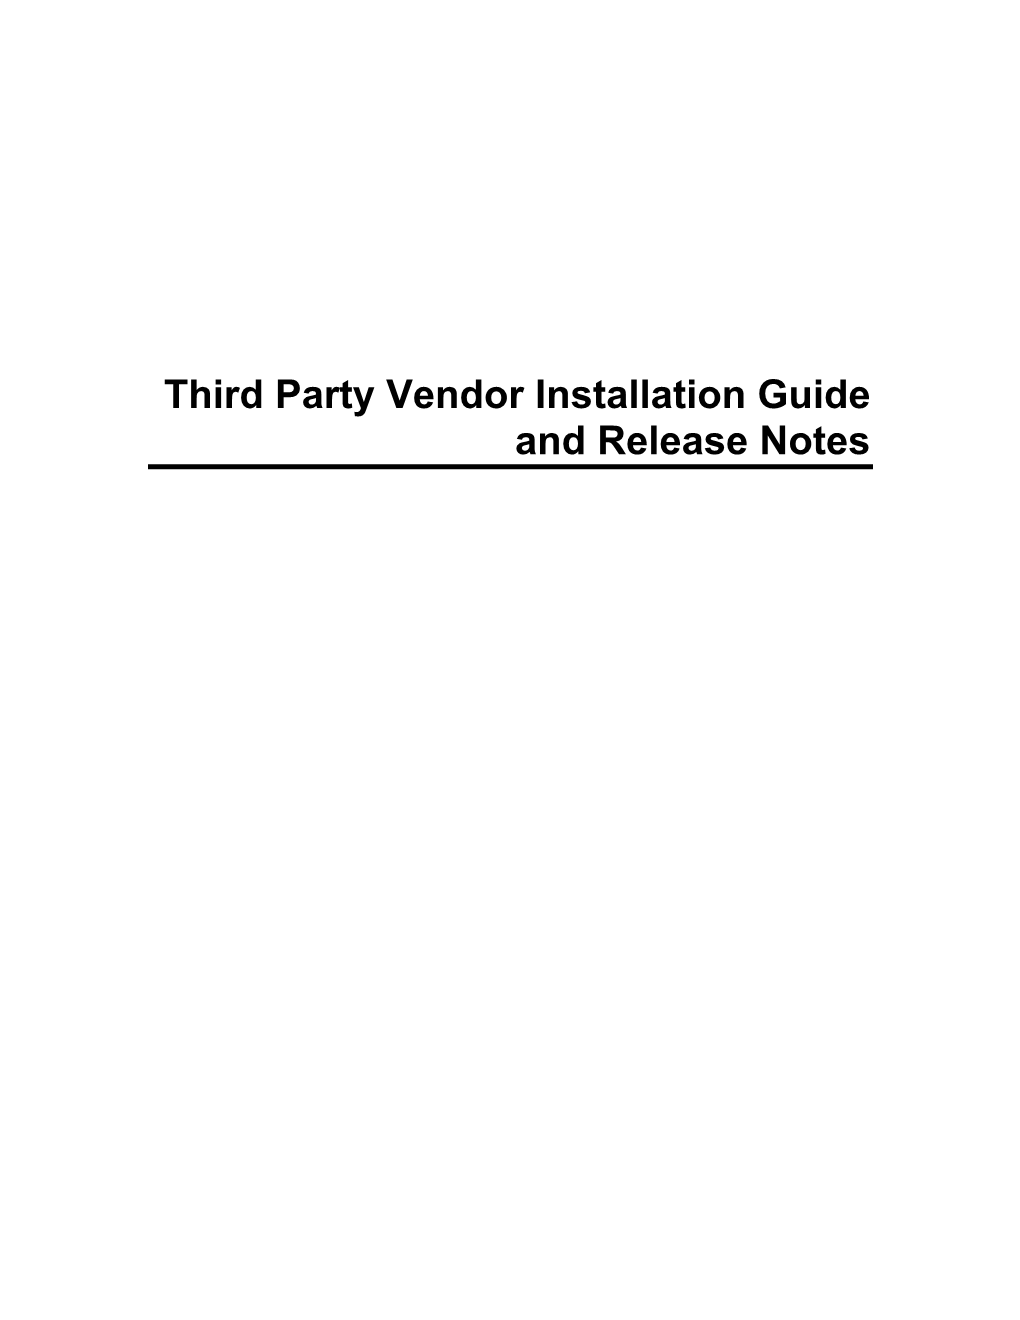 Third Party Vendor Installation Guide and Release Notes